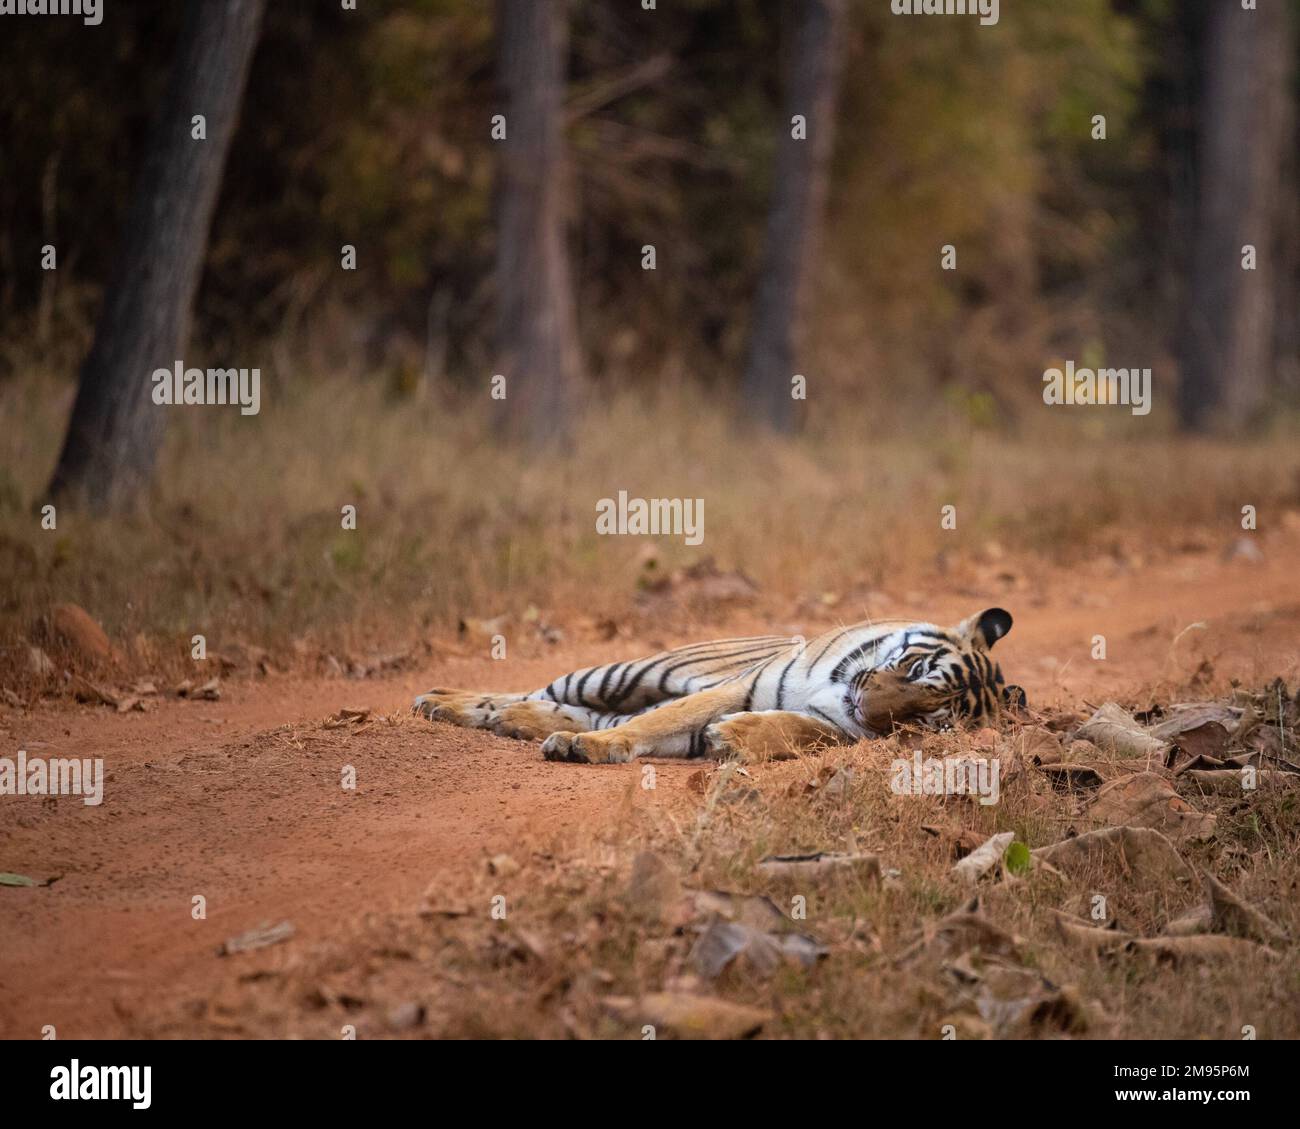 Happy with its victory. India: THESE IMAGES show an incident of bullying between a tiger and a sloth bear after a freak encounter.  One image shows Ro Stock Photo